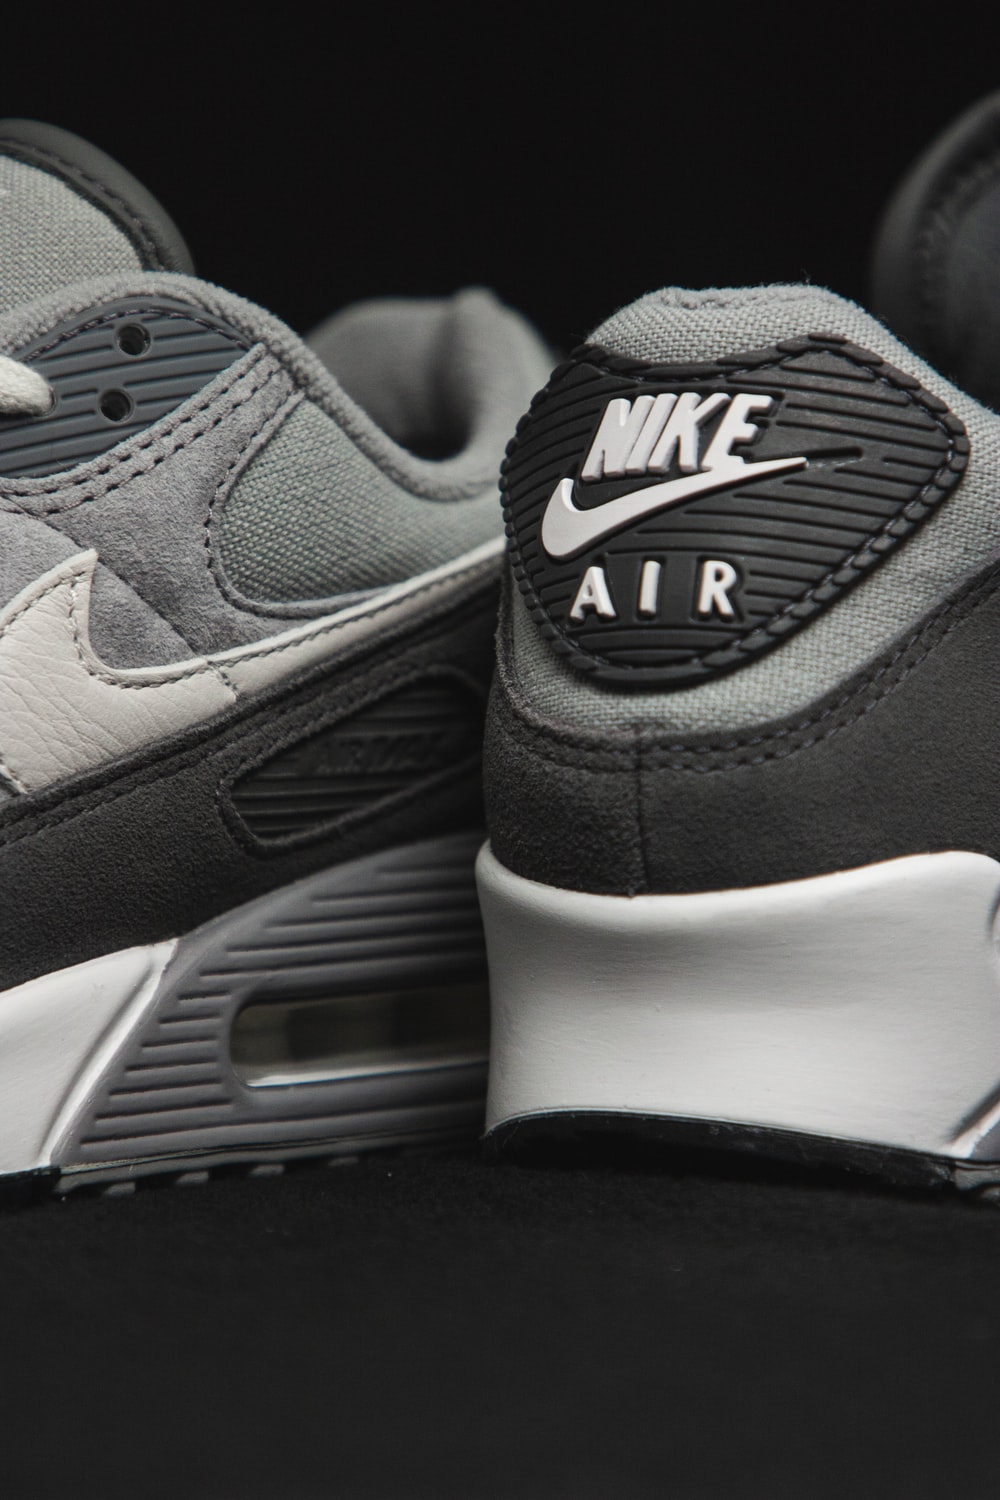 Nike Air Max Picture. Download Free Image